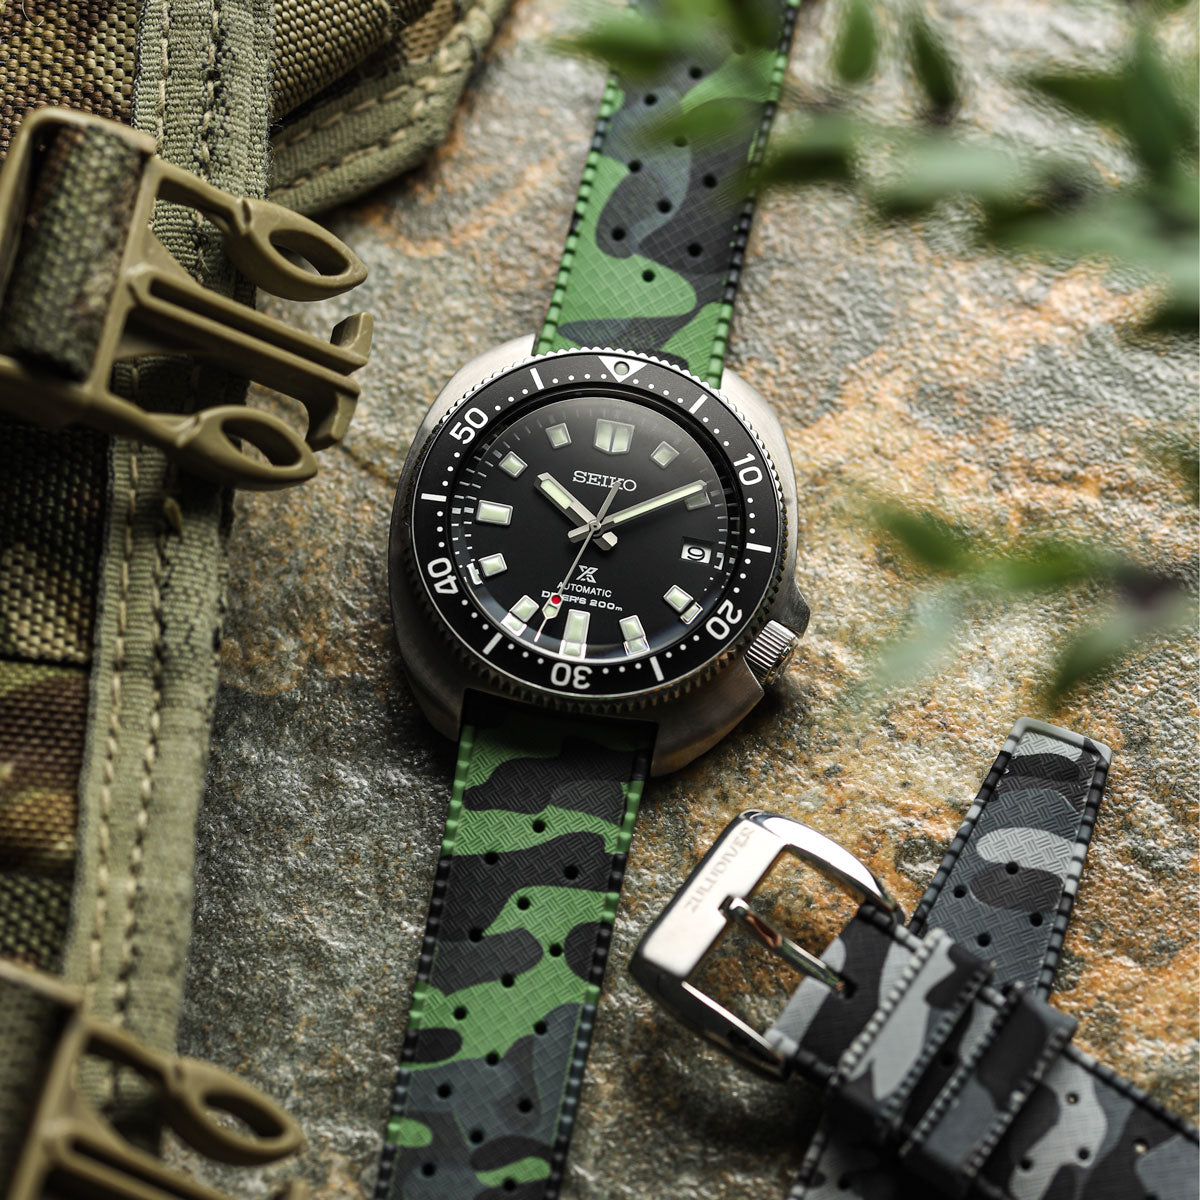 ZULUDIVER Tropical Style Camo Rubber Watch Strap - Red - additional image 3